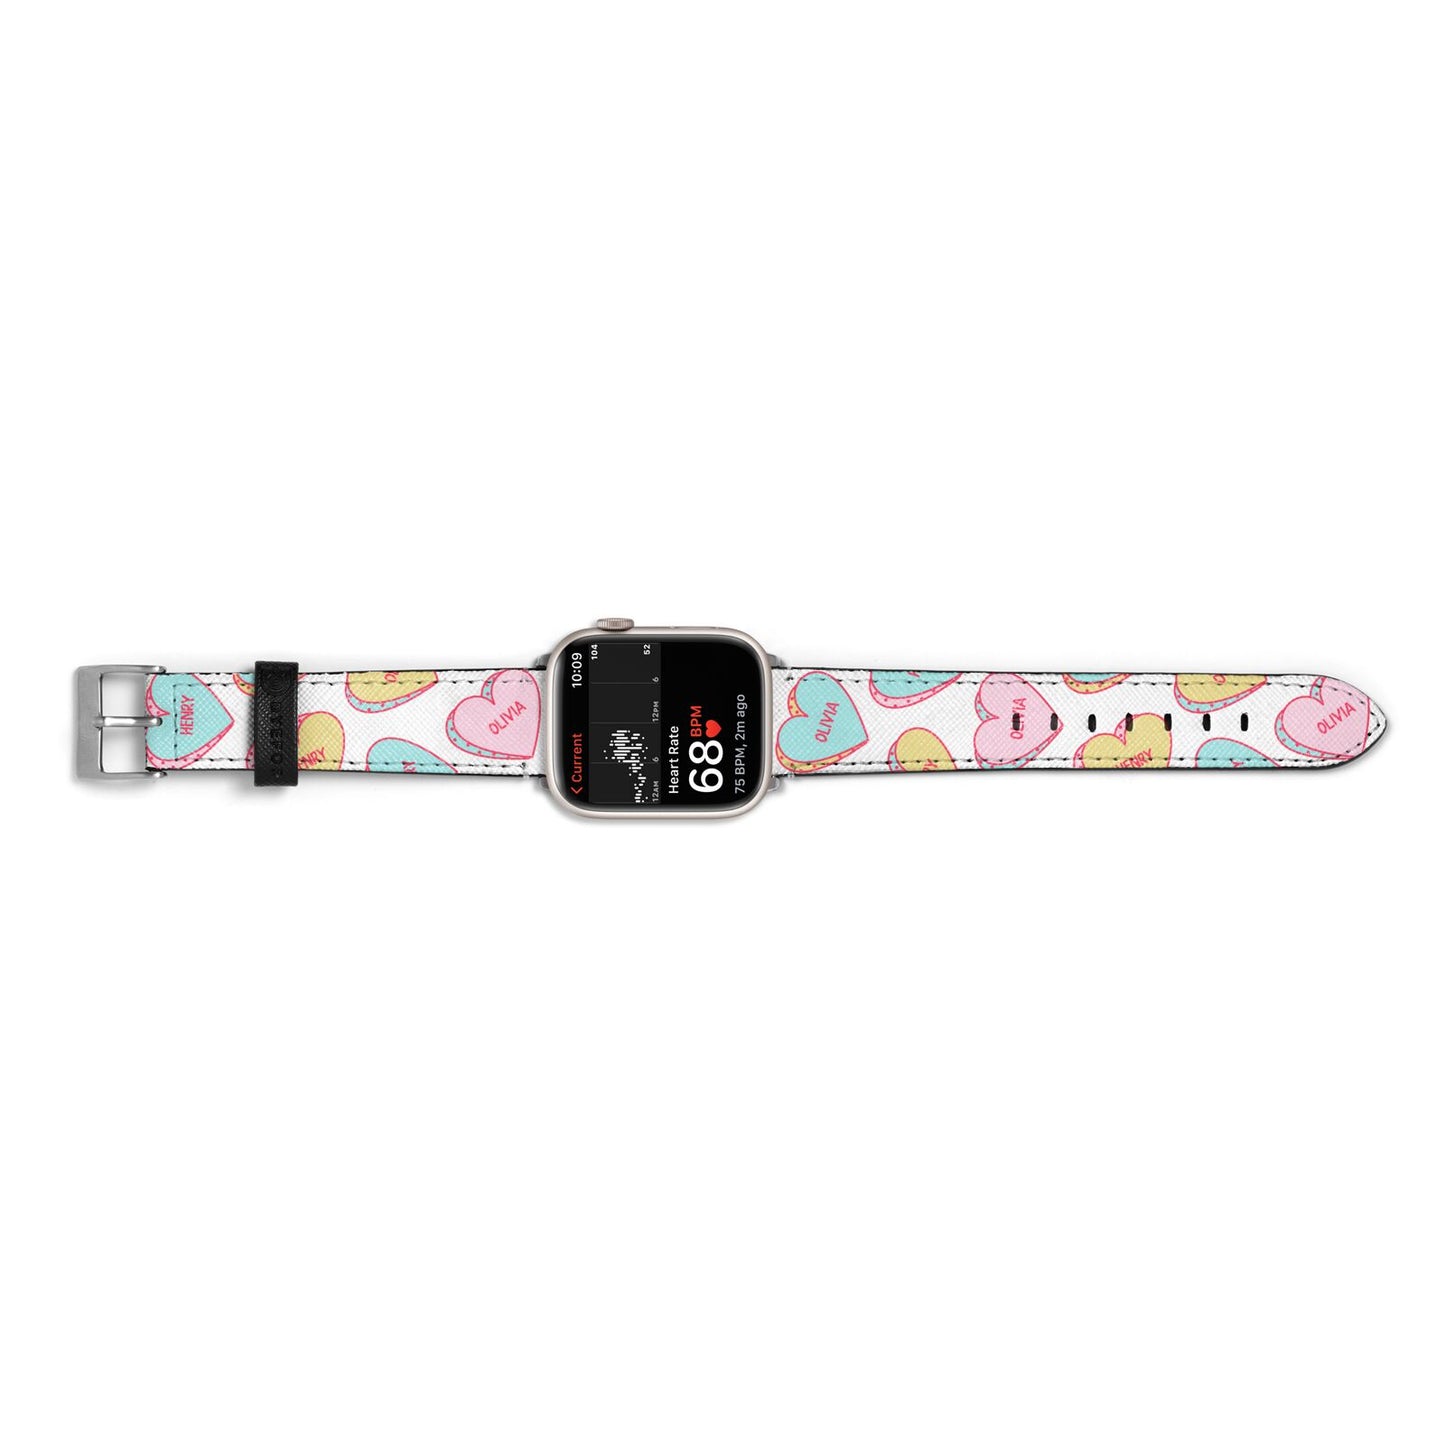 Personalised Heart Sweets Apple Watch Strap Size 38mm Landscape Image Silver Hardware